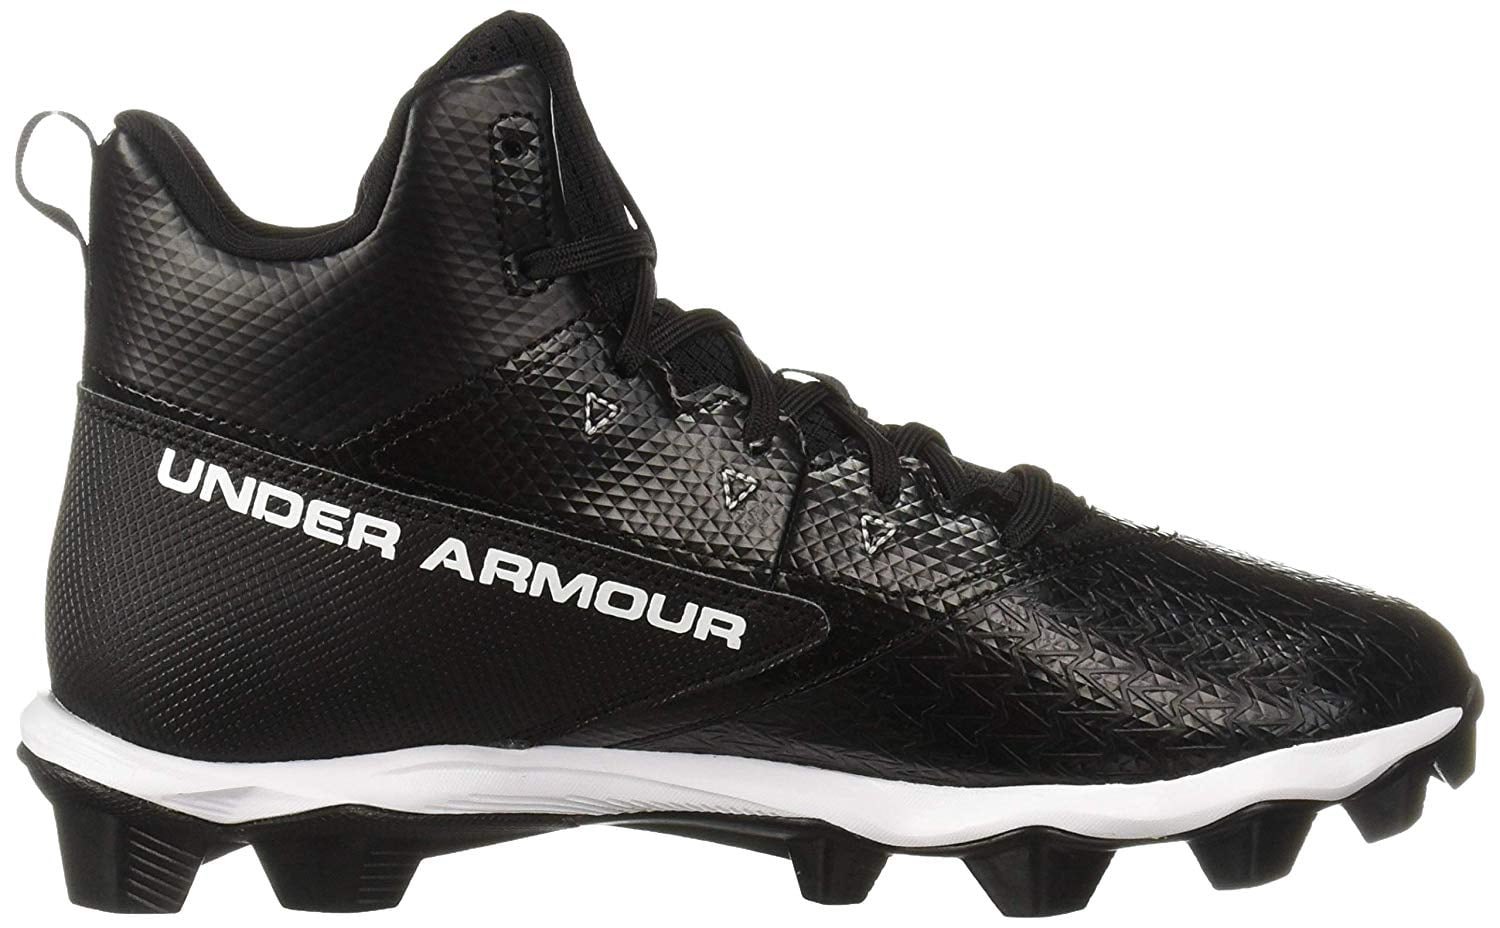 Under Armour Men's Hammer Mid RM Football Cleats NIB Choose your size & color 